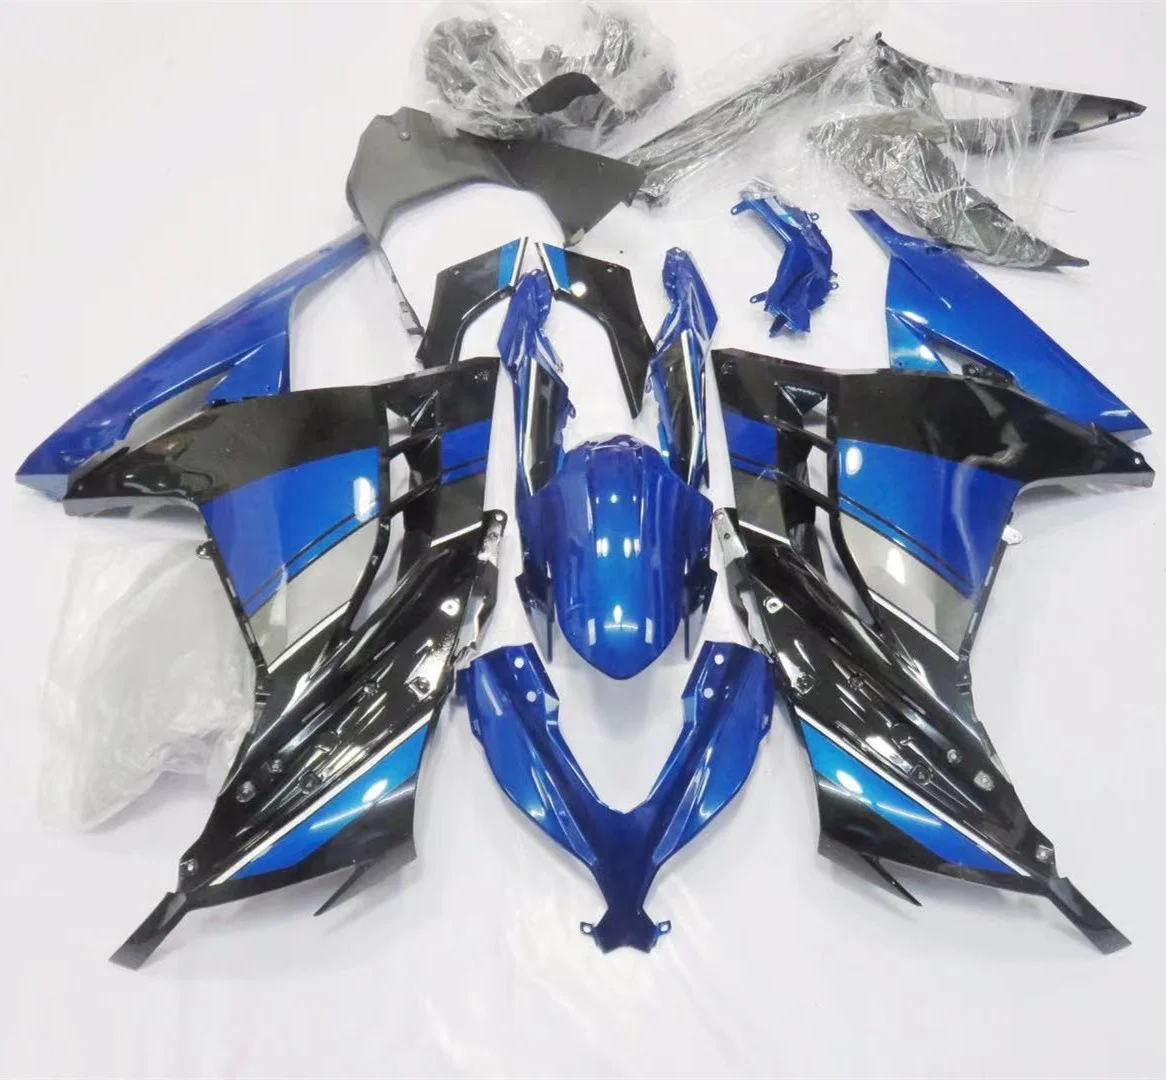 

2022 WHSC Motorcycle Fairing Fit For KAWASAKI Ninja 300 2013-2016 ABS Plastic Bodywork Blue Black, Pictures shown